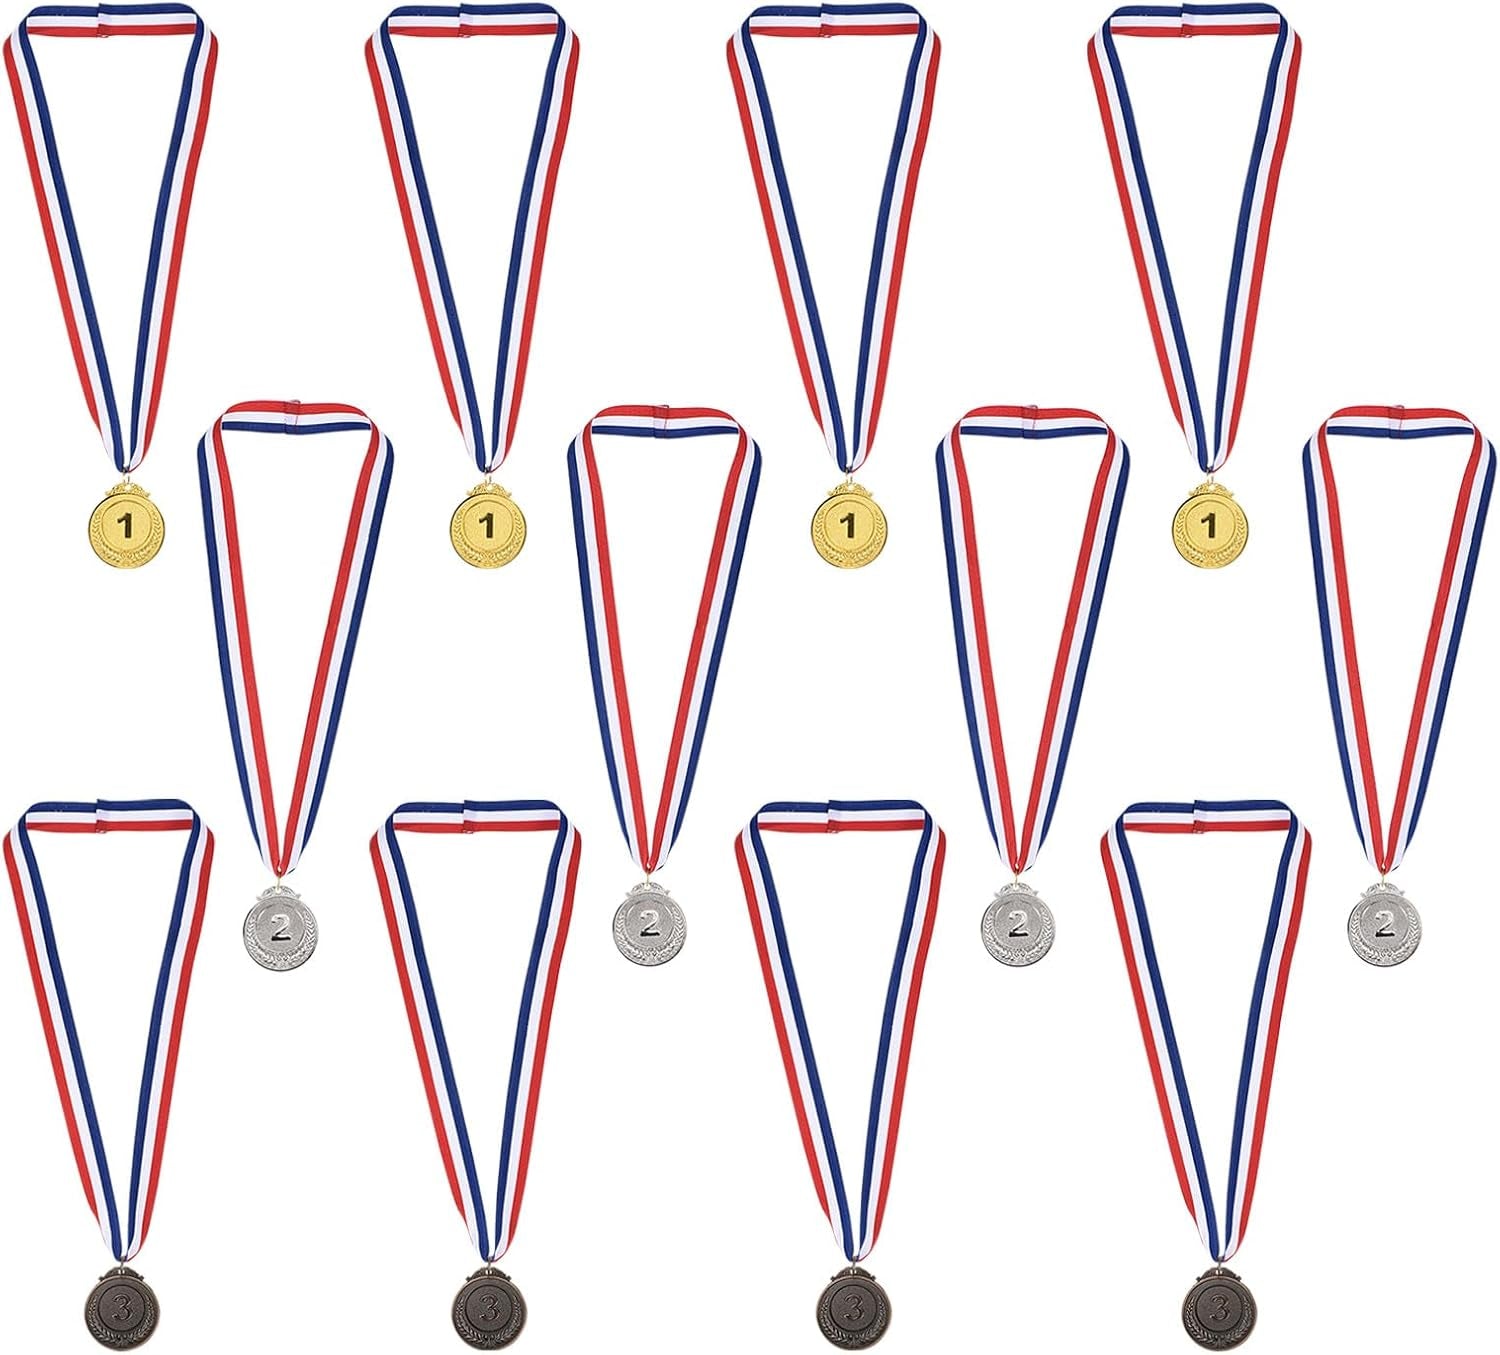 2 Inch Gold Silver Bronze Winner Award Medals, 12 Pack Olympic Style Award Medals 1St 2Nd 3Rd Prizes with Ribbon for Games Sports Competitions